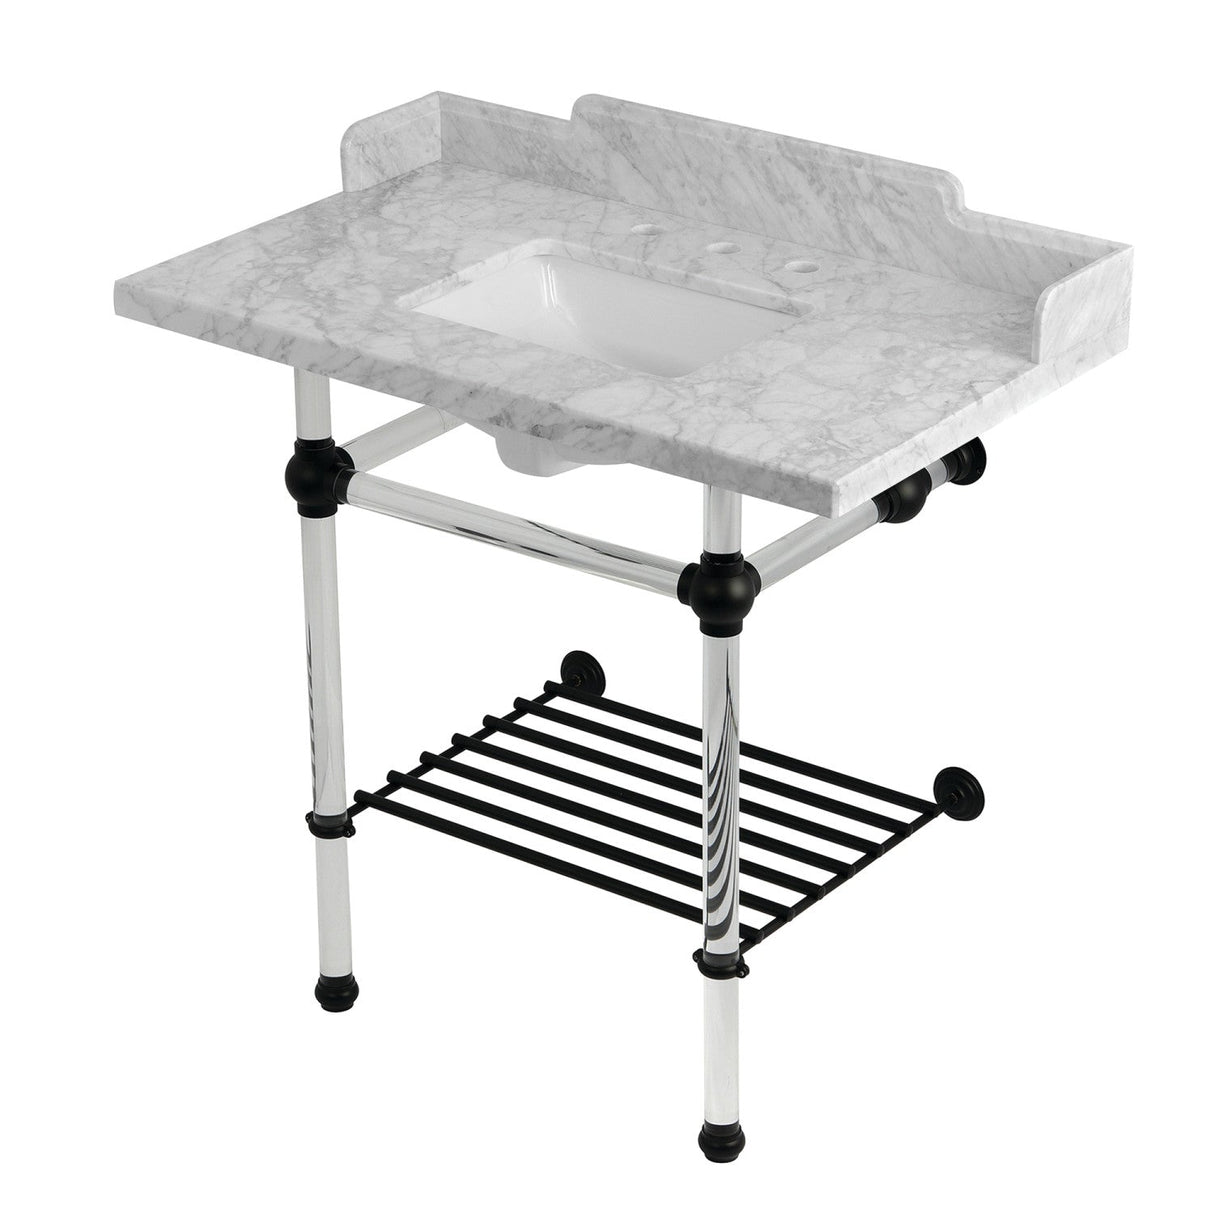 Pemberton LMS36MASQB0 36-Inch Console Sink with Acrylic Legs (8-Inch, 3 Hole), Marble White/Matte Black